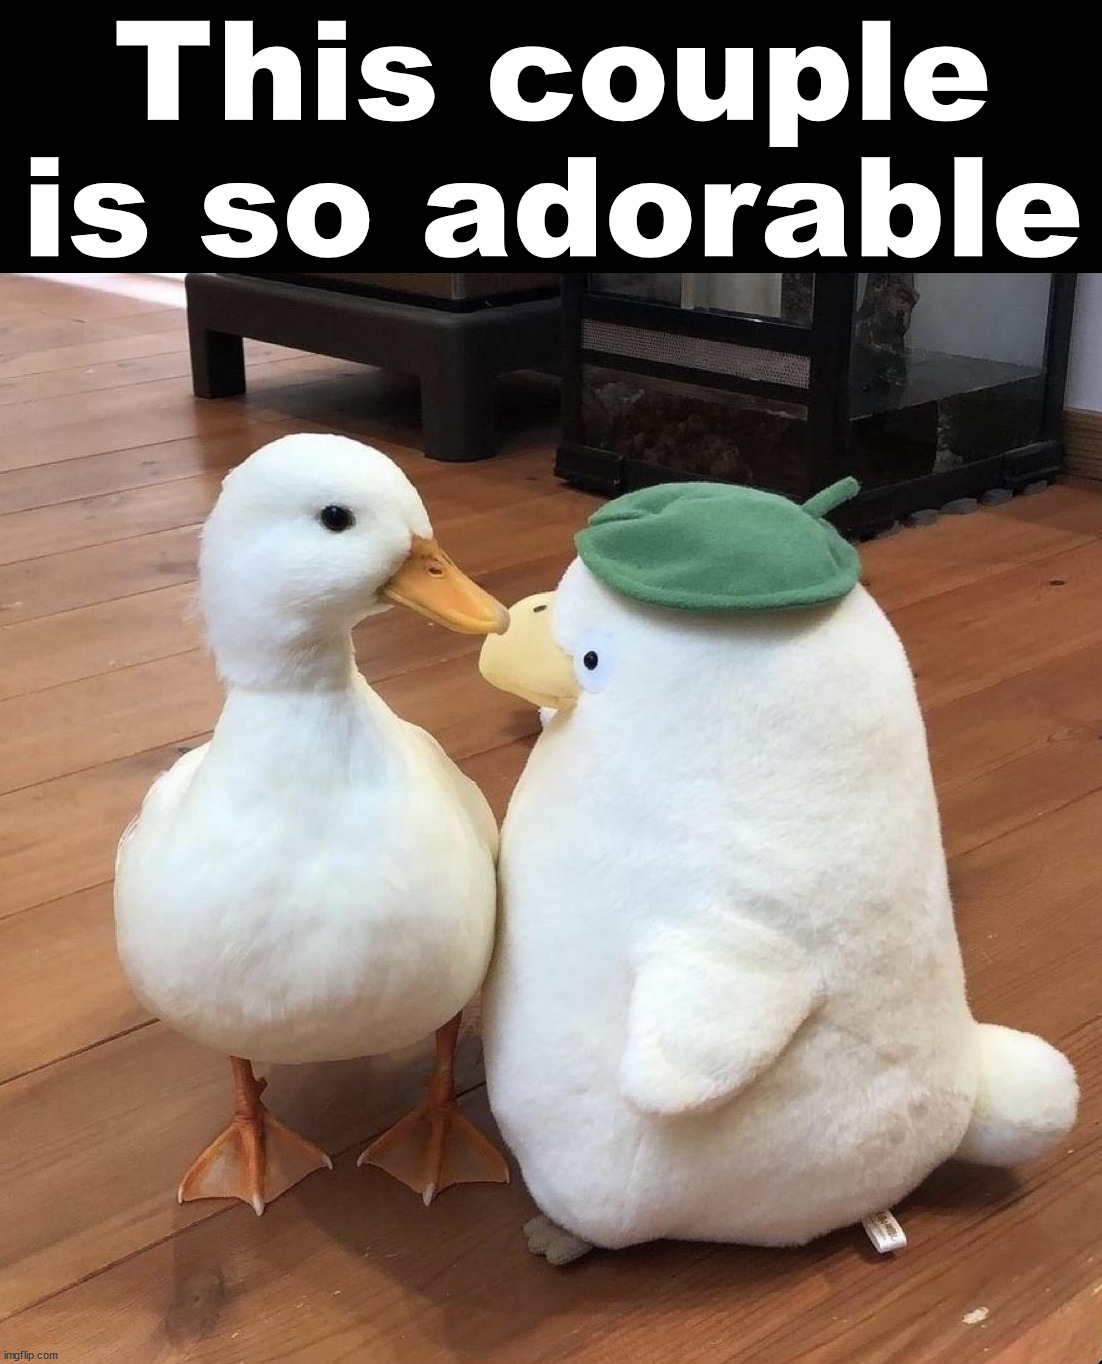 This couple is so adorable | image tagged in ducks | made w/ Imgflip meme maker